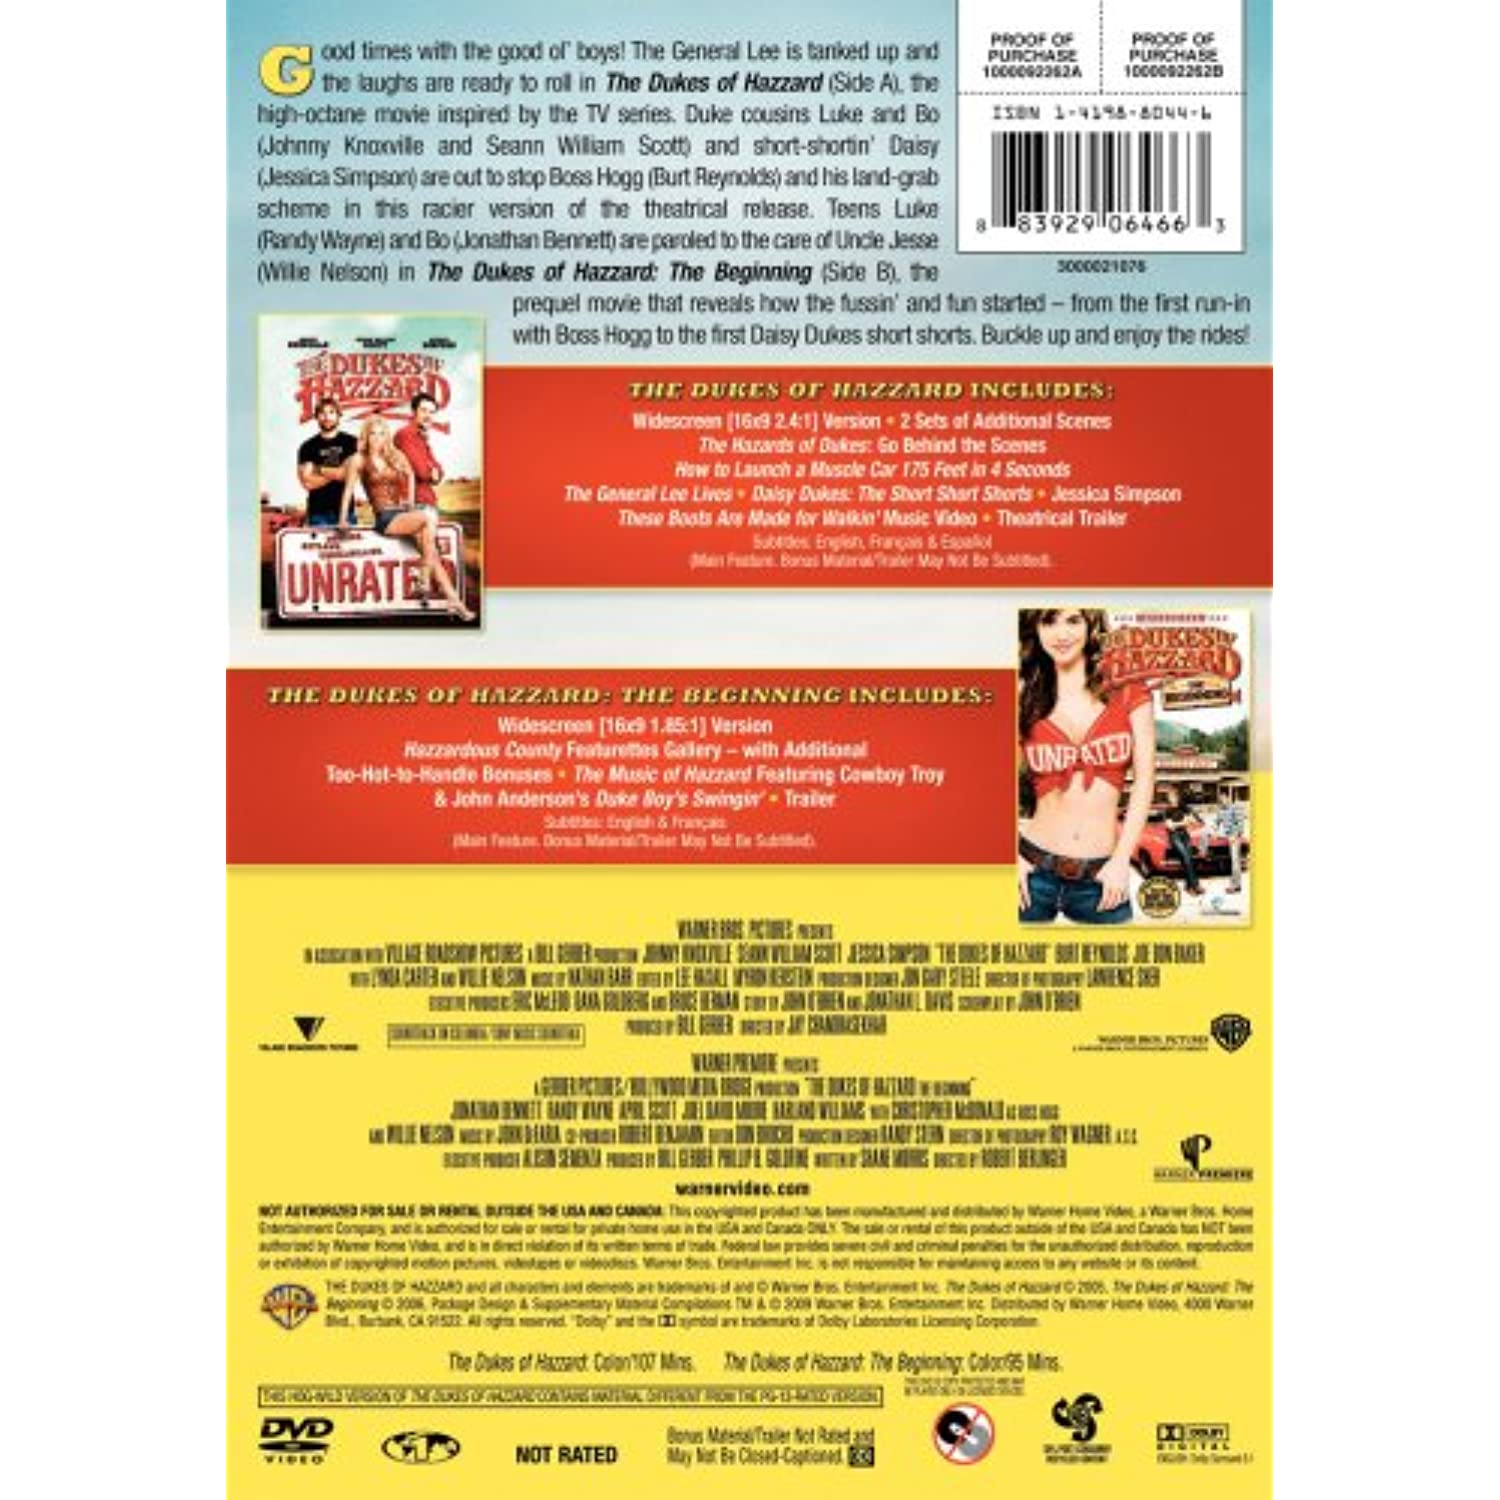 The Dukes of Hazzard Film Collection (DVD), Warner Home Video, Comedy - image 2 of 2